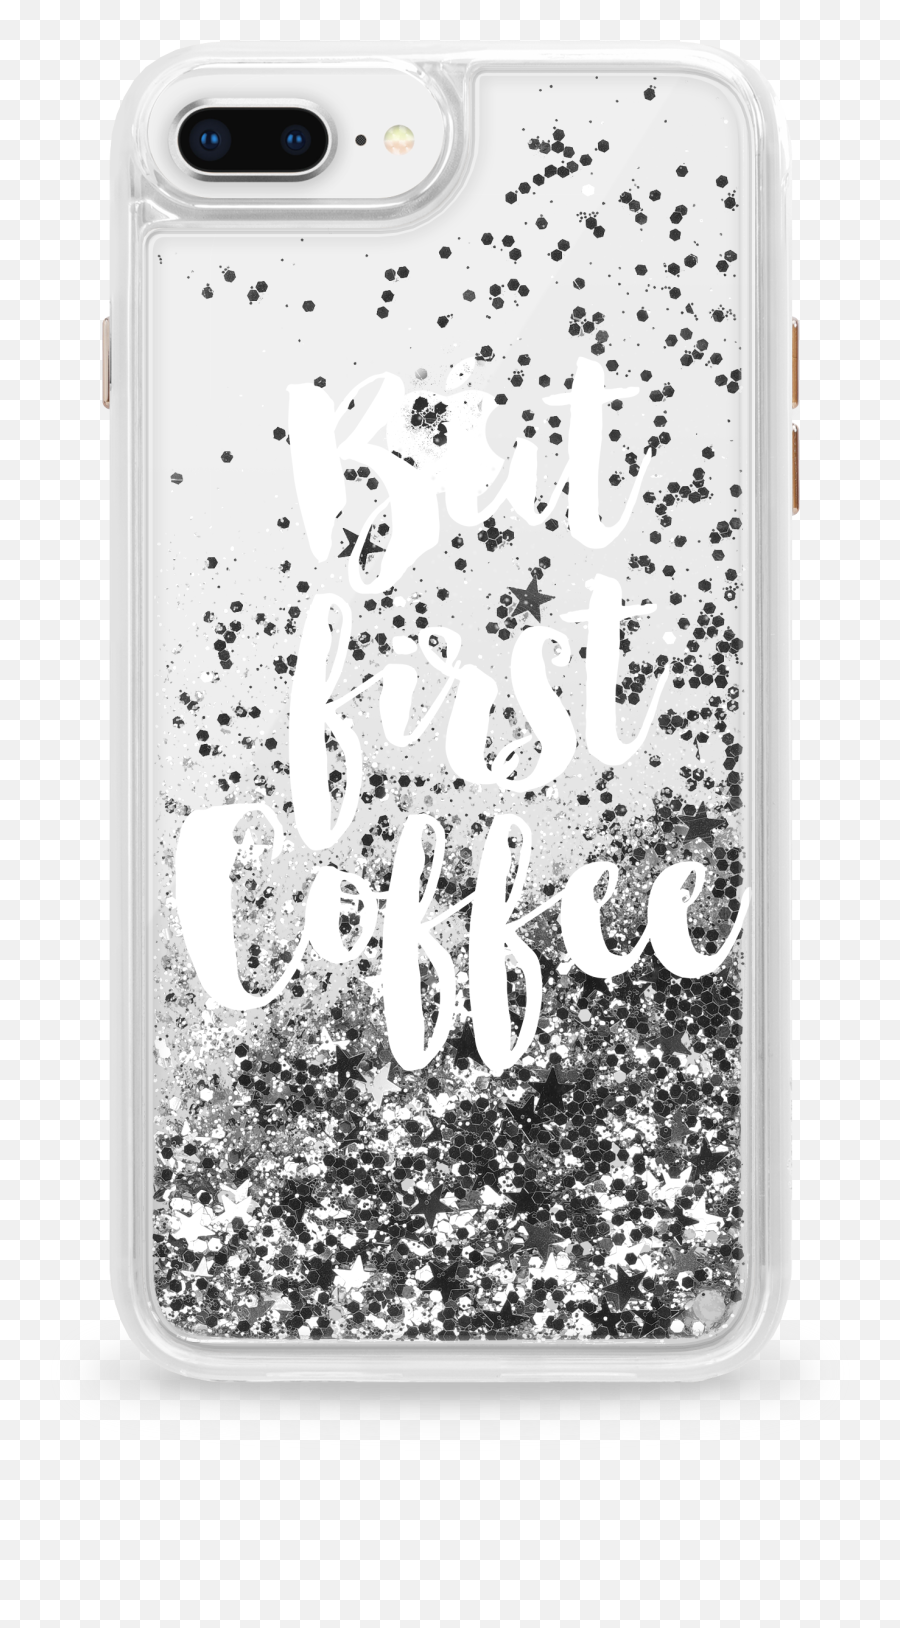 Download Hd Open High - Resolution Image Cover Iphone 66s7 Casetify Gliter Png,Iphone 6 Png